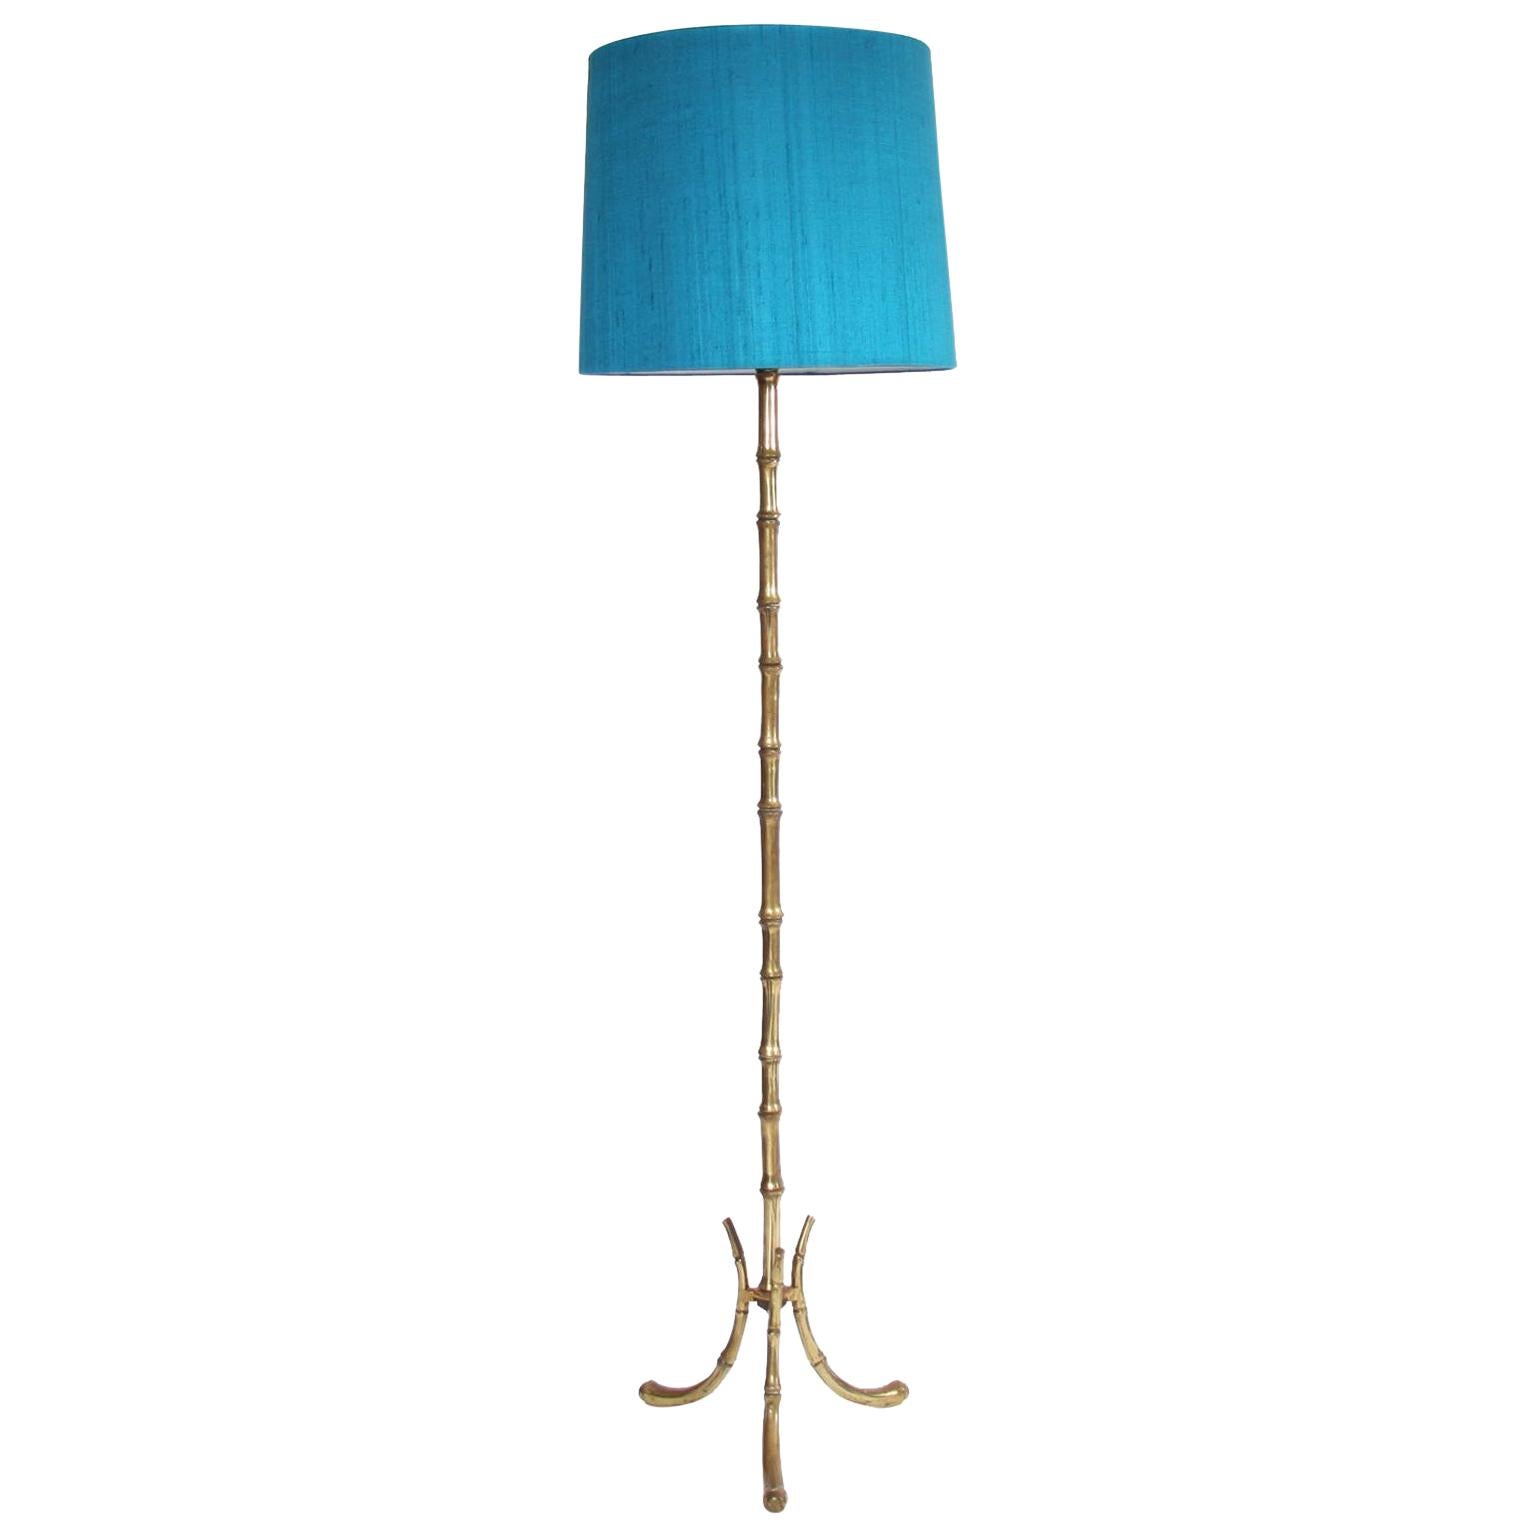 Mid-20th Century Brass Faux Bamboo Floor Lamp For Sale